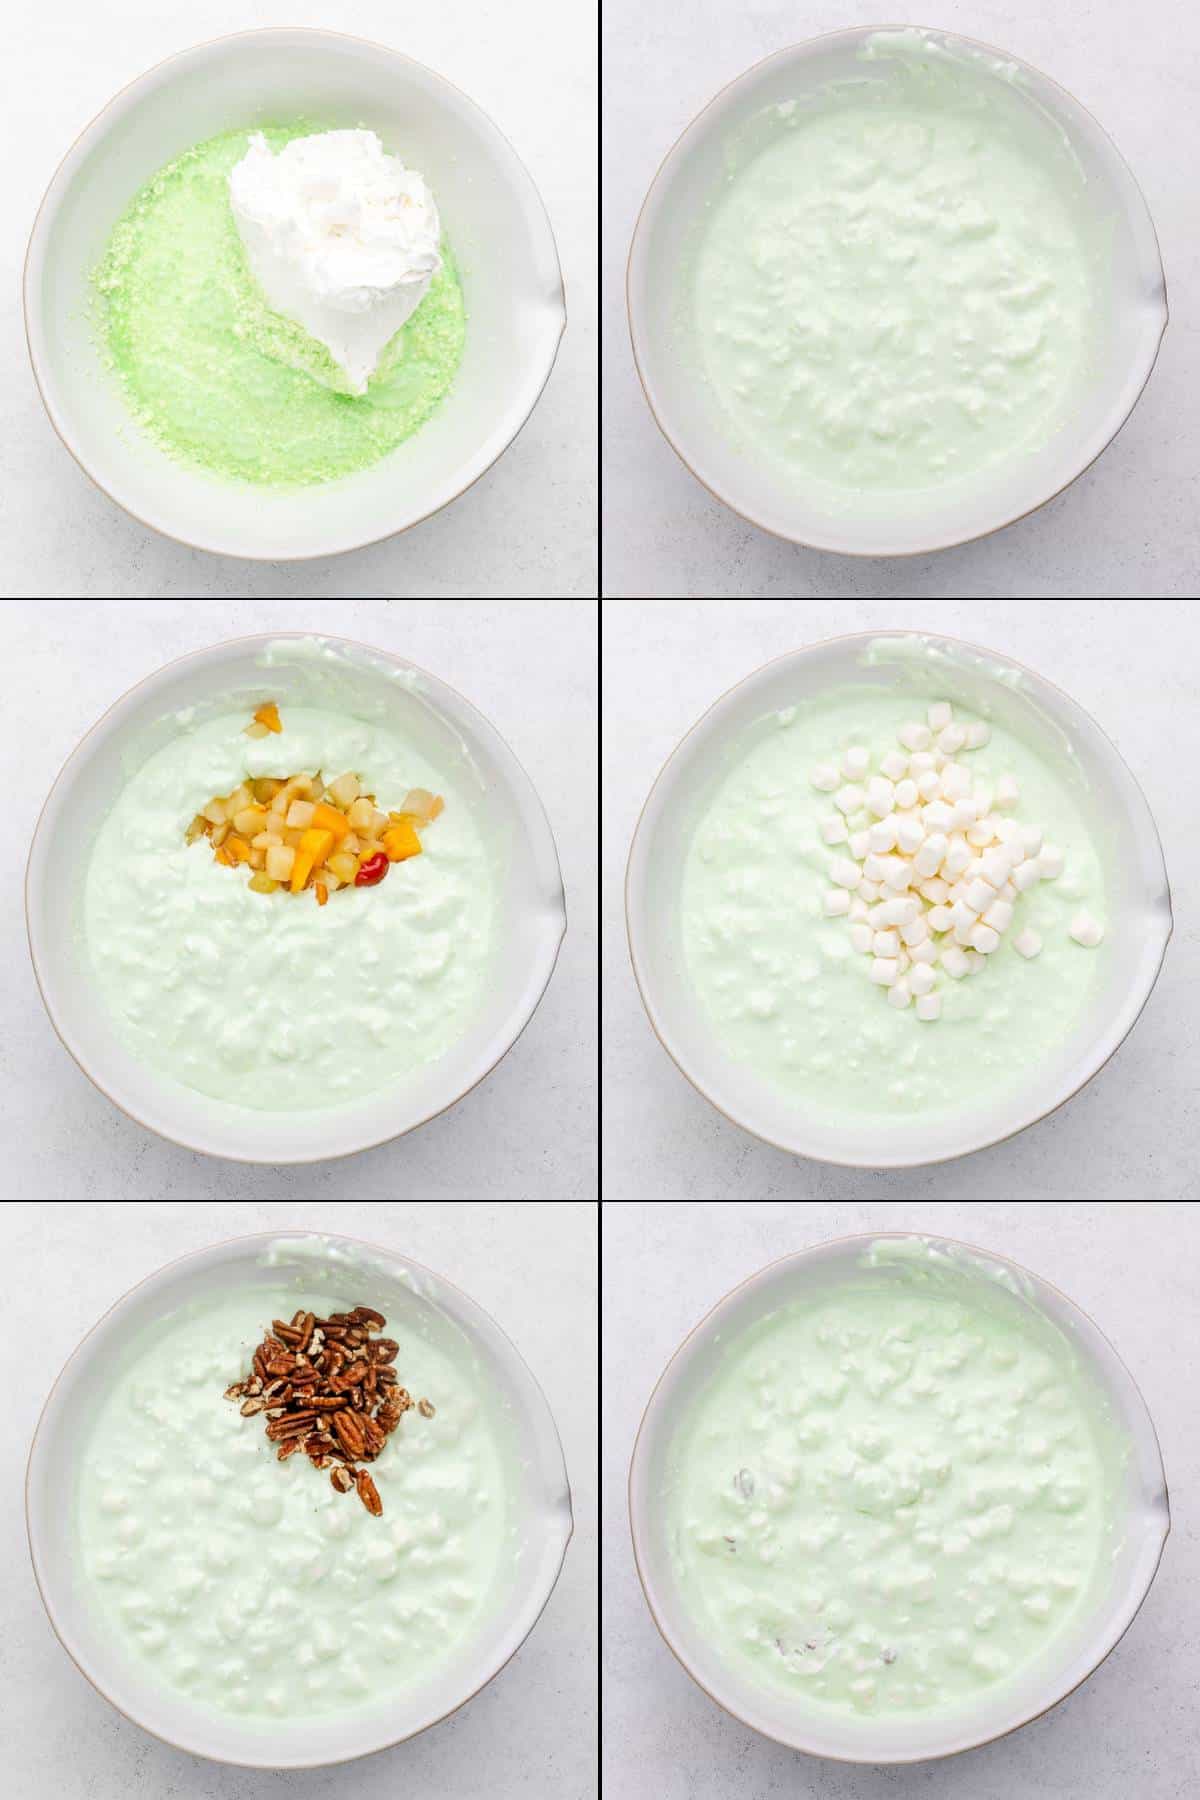 Collage of adding whipped cream, fruit, marshmallows, and nuts to lime jello mixture.